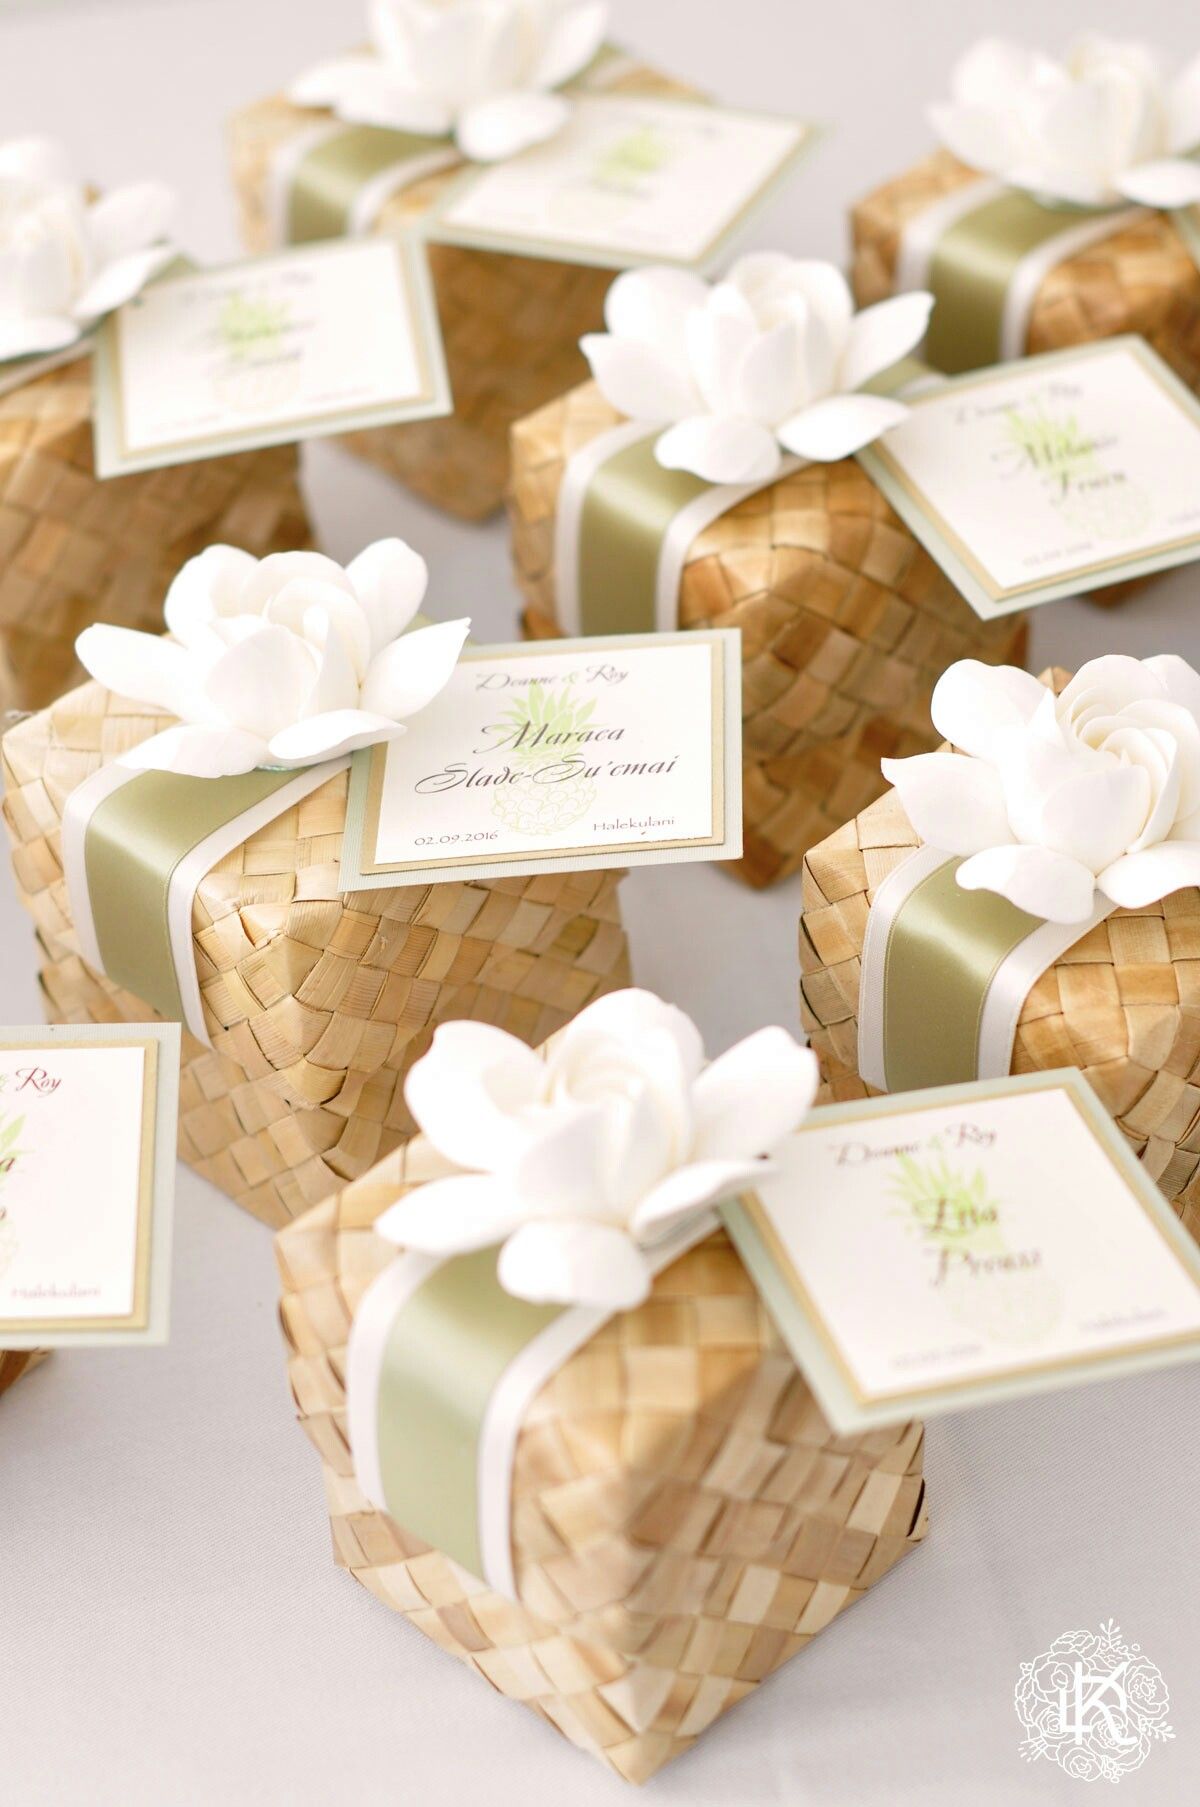 Our Wedding Favour Boxes Designed And Made By Dkdesignshawaii